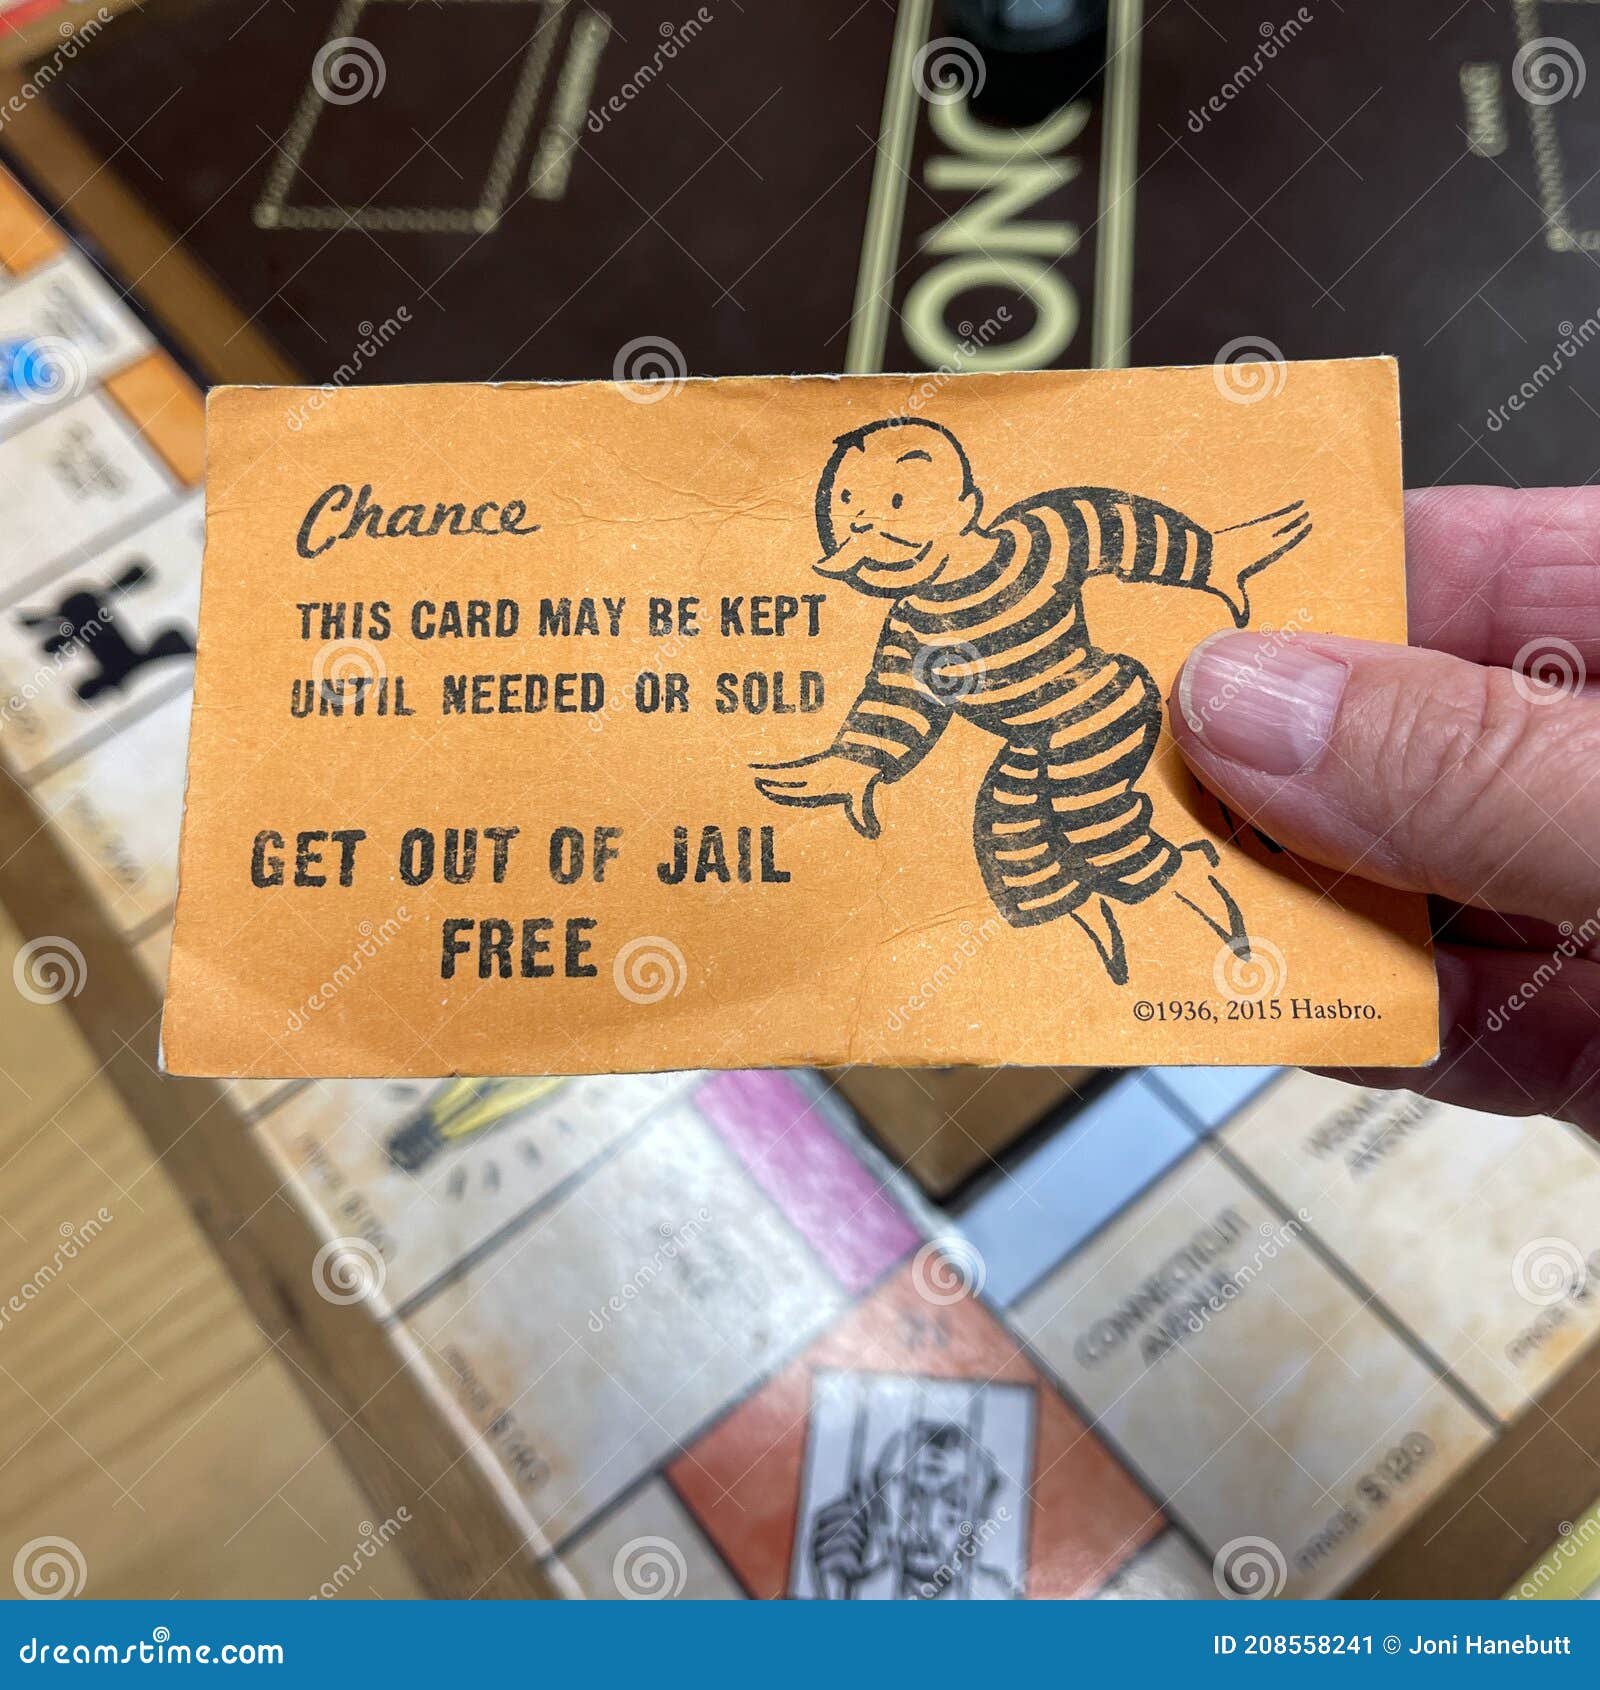 a-get-out-of-jail-free-card-from-a-monopoly-set-editorial-photo-image